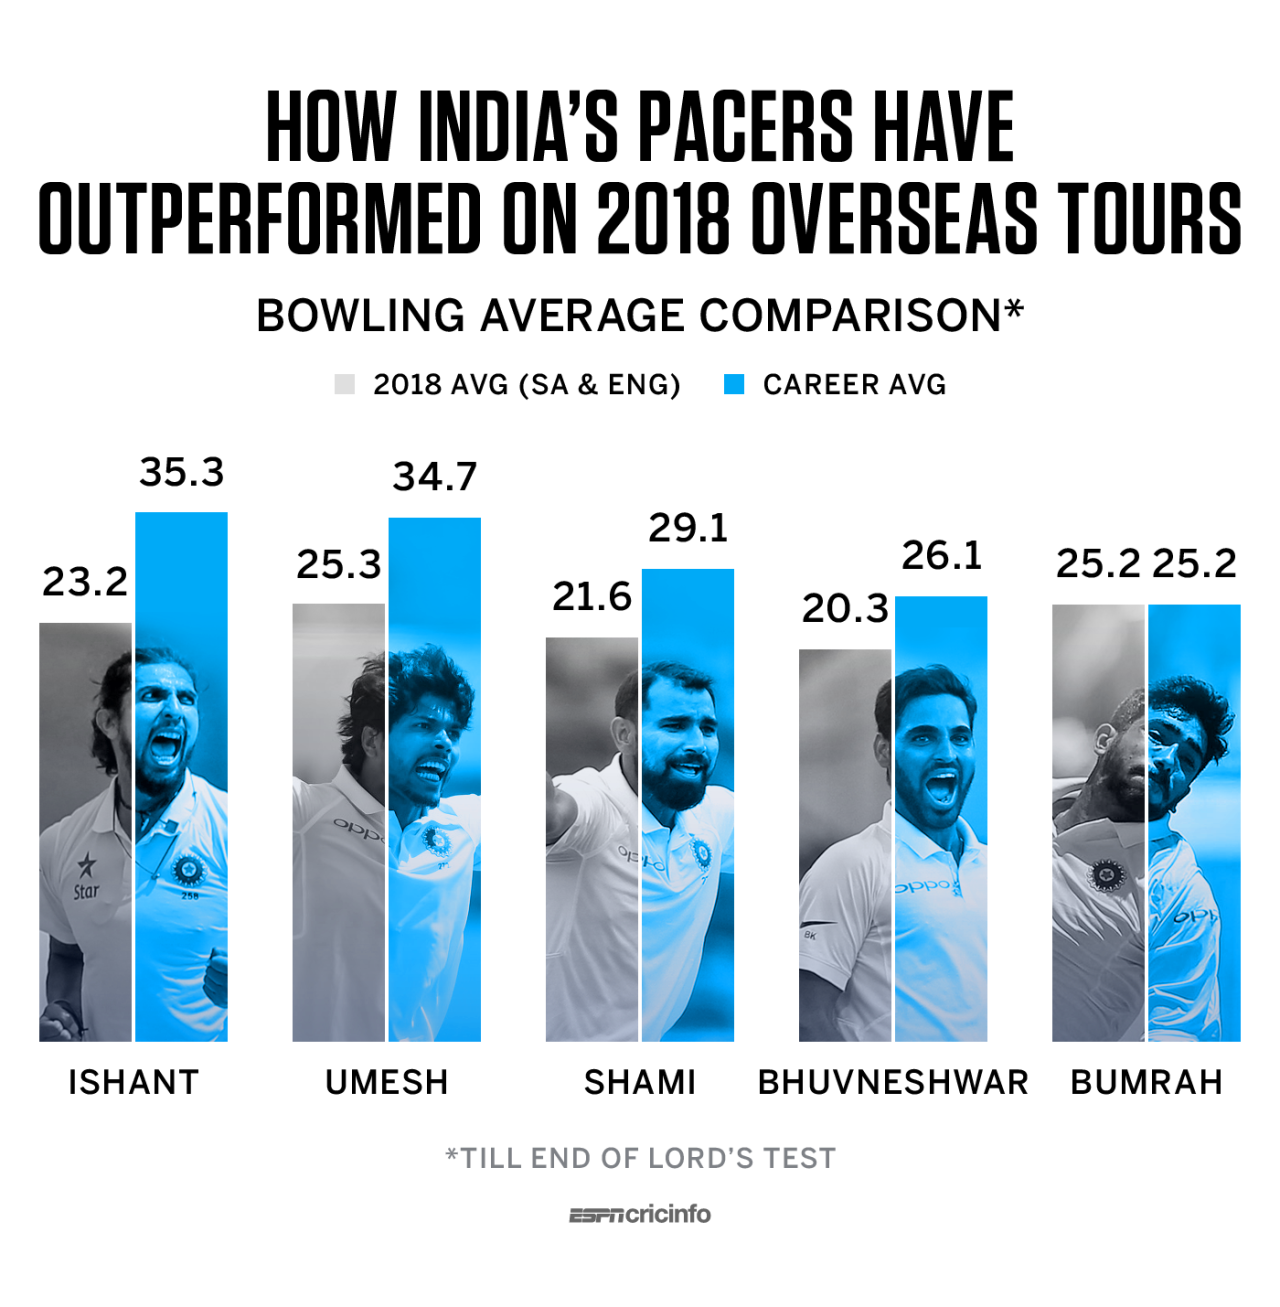 Graphic: India's pace bowlers have outperformed their career averages this year